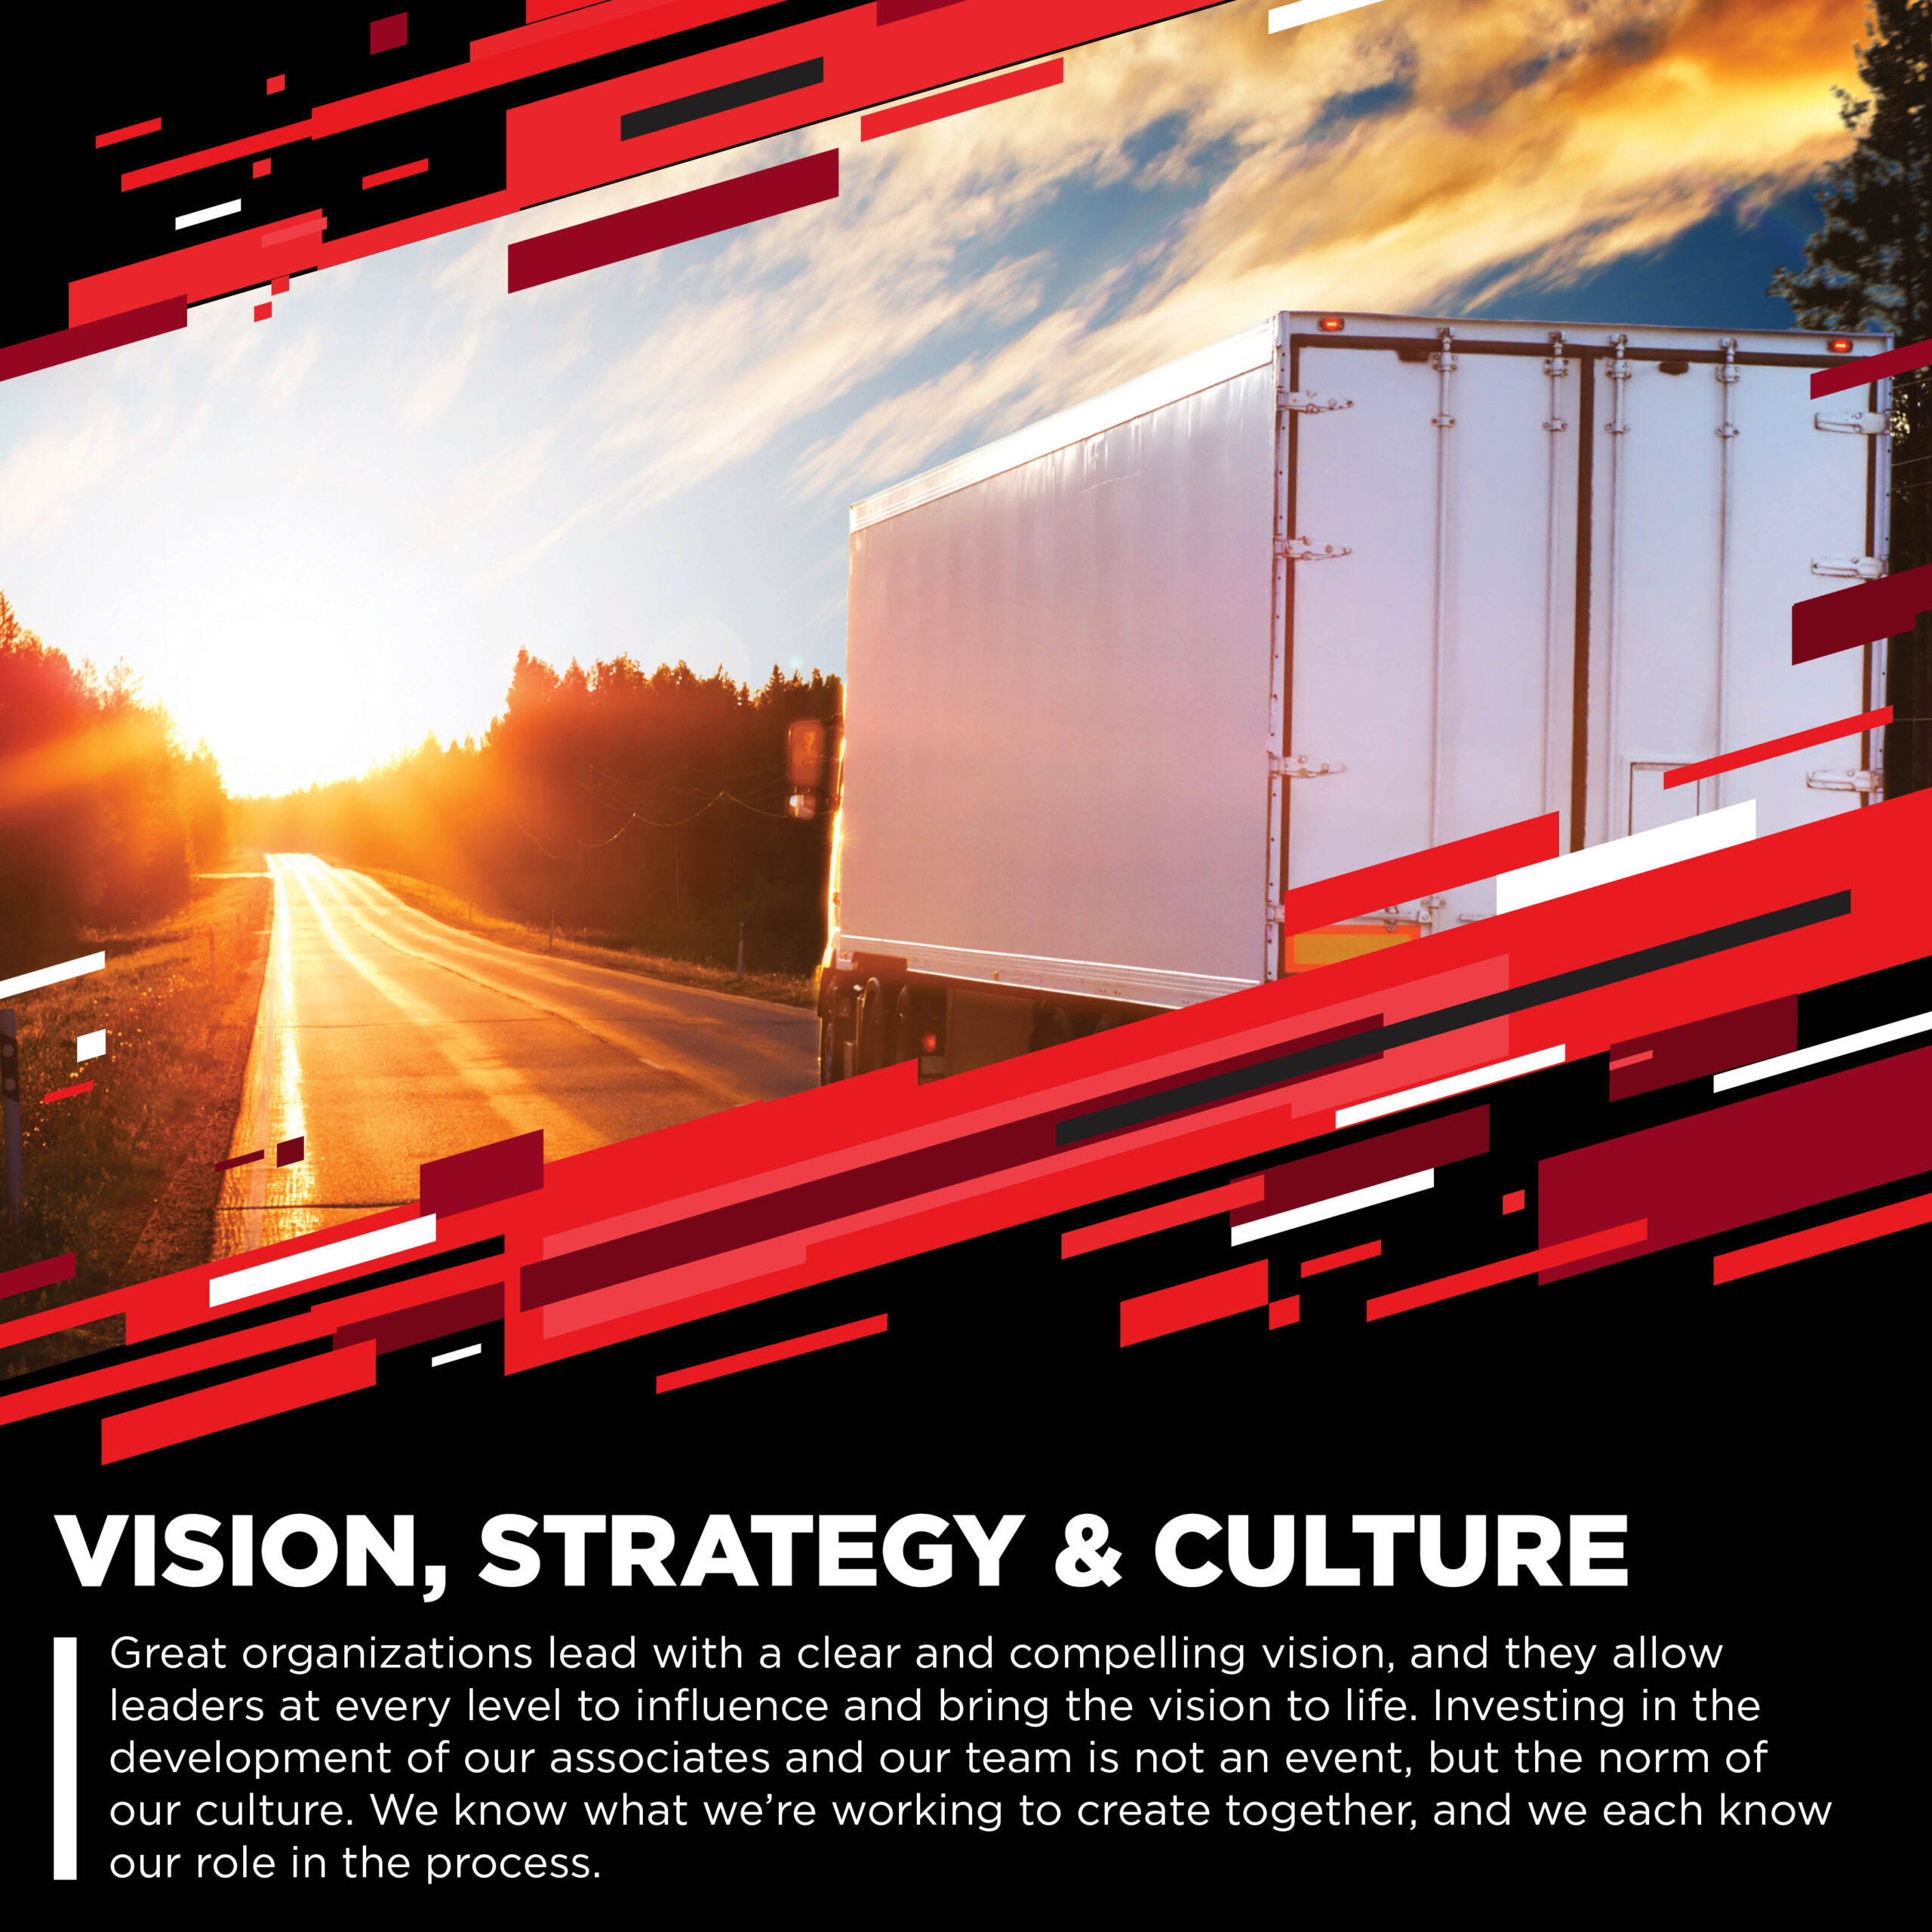 Vision, Strategy & Culture